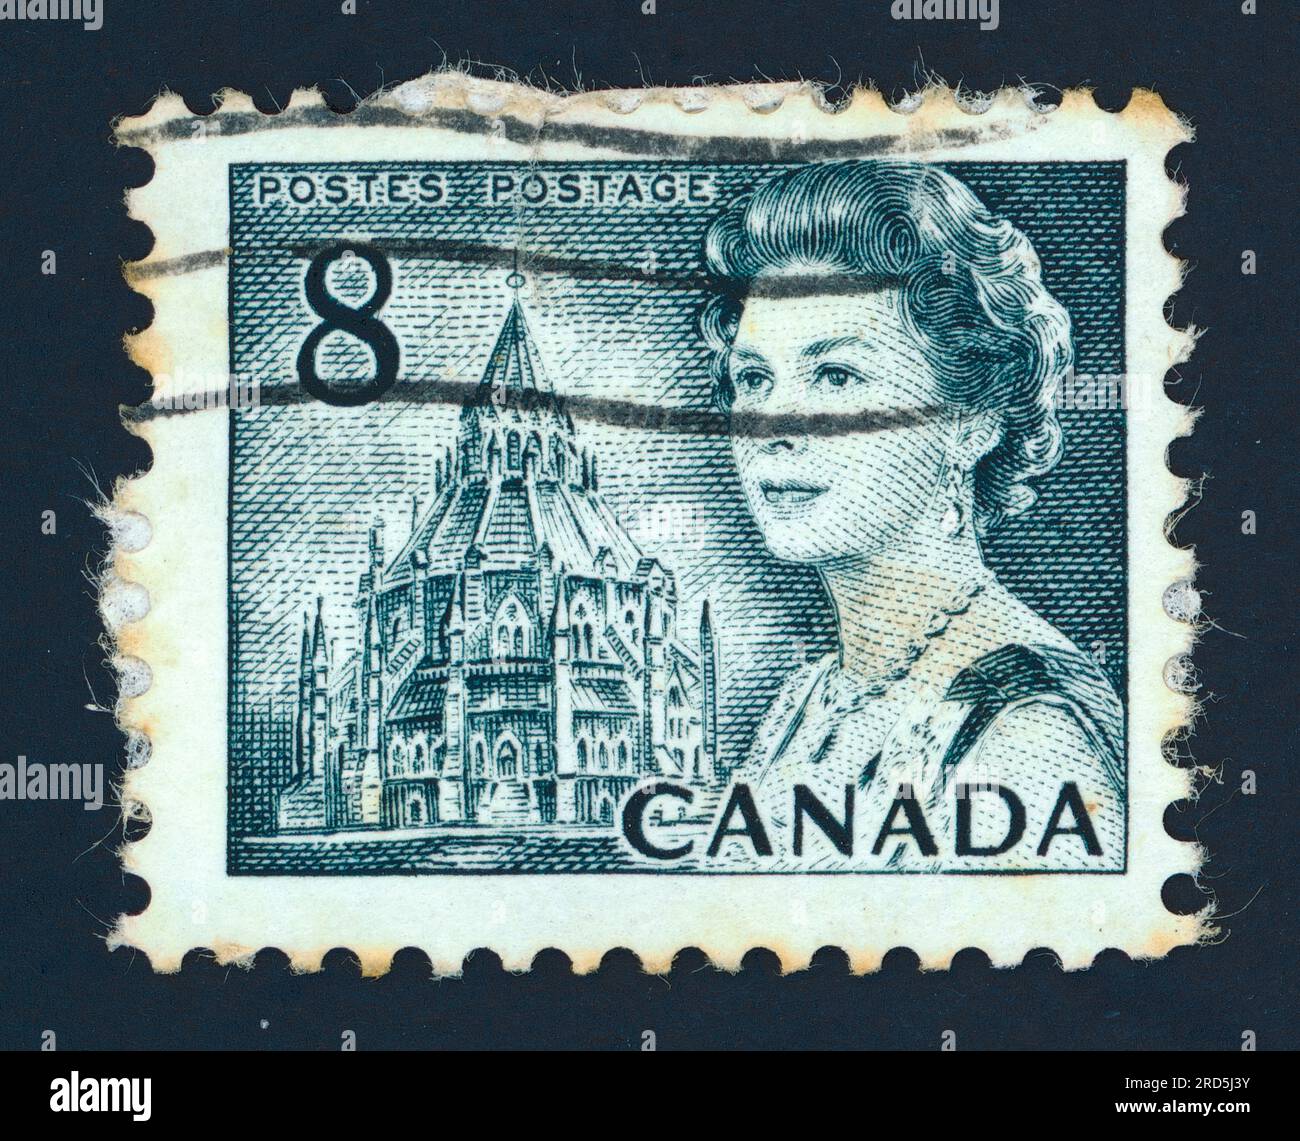 Queen Elizabeth II. Postage stamp issued in Canada in 1960s. Stock Photo